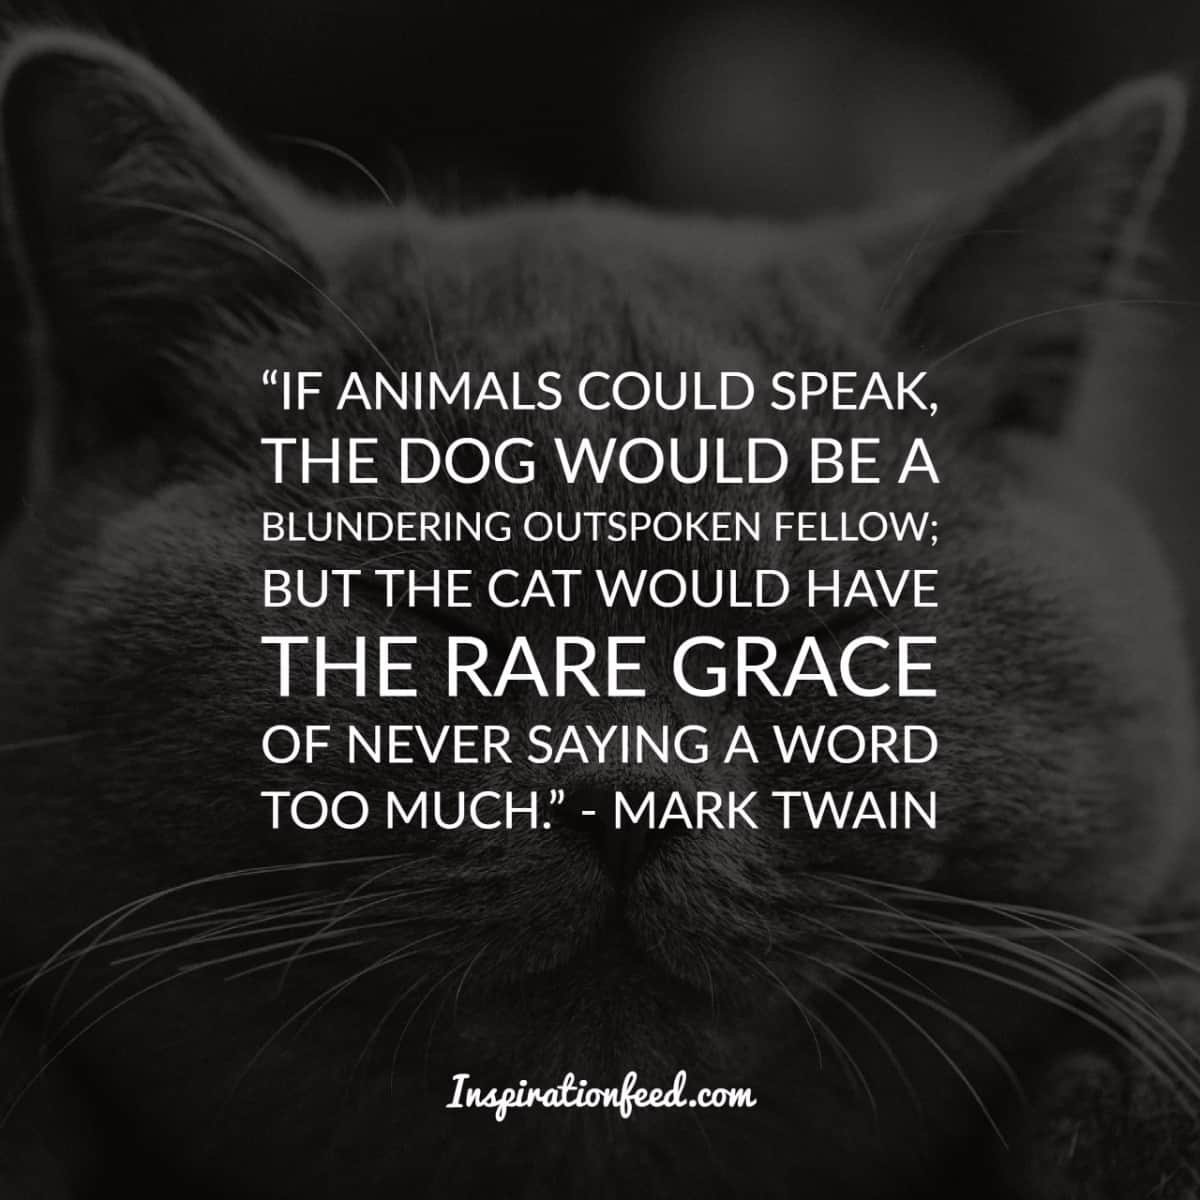 40 Precious Quotes About Cats That Will Brighten Your Day - Inspirationfeed